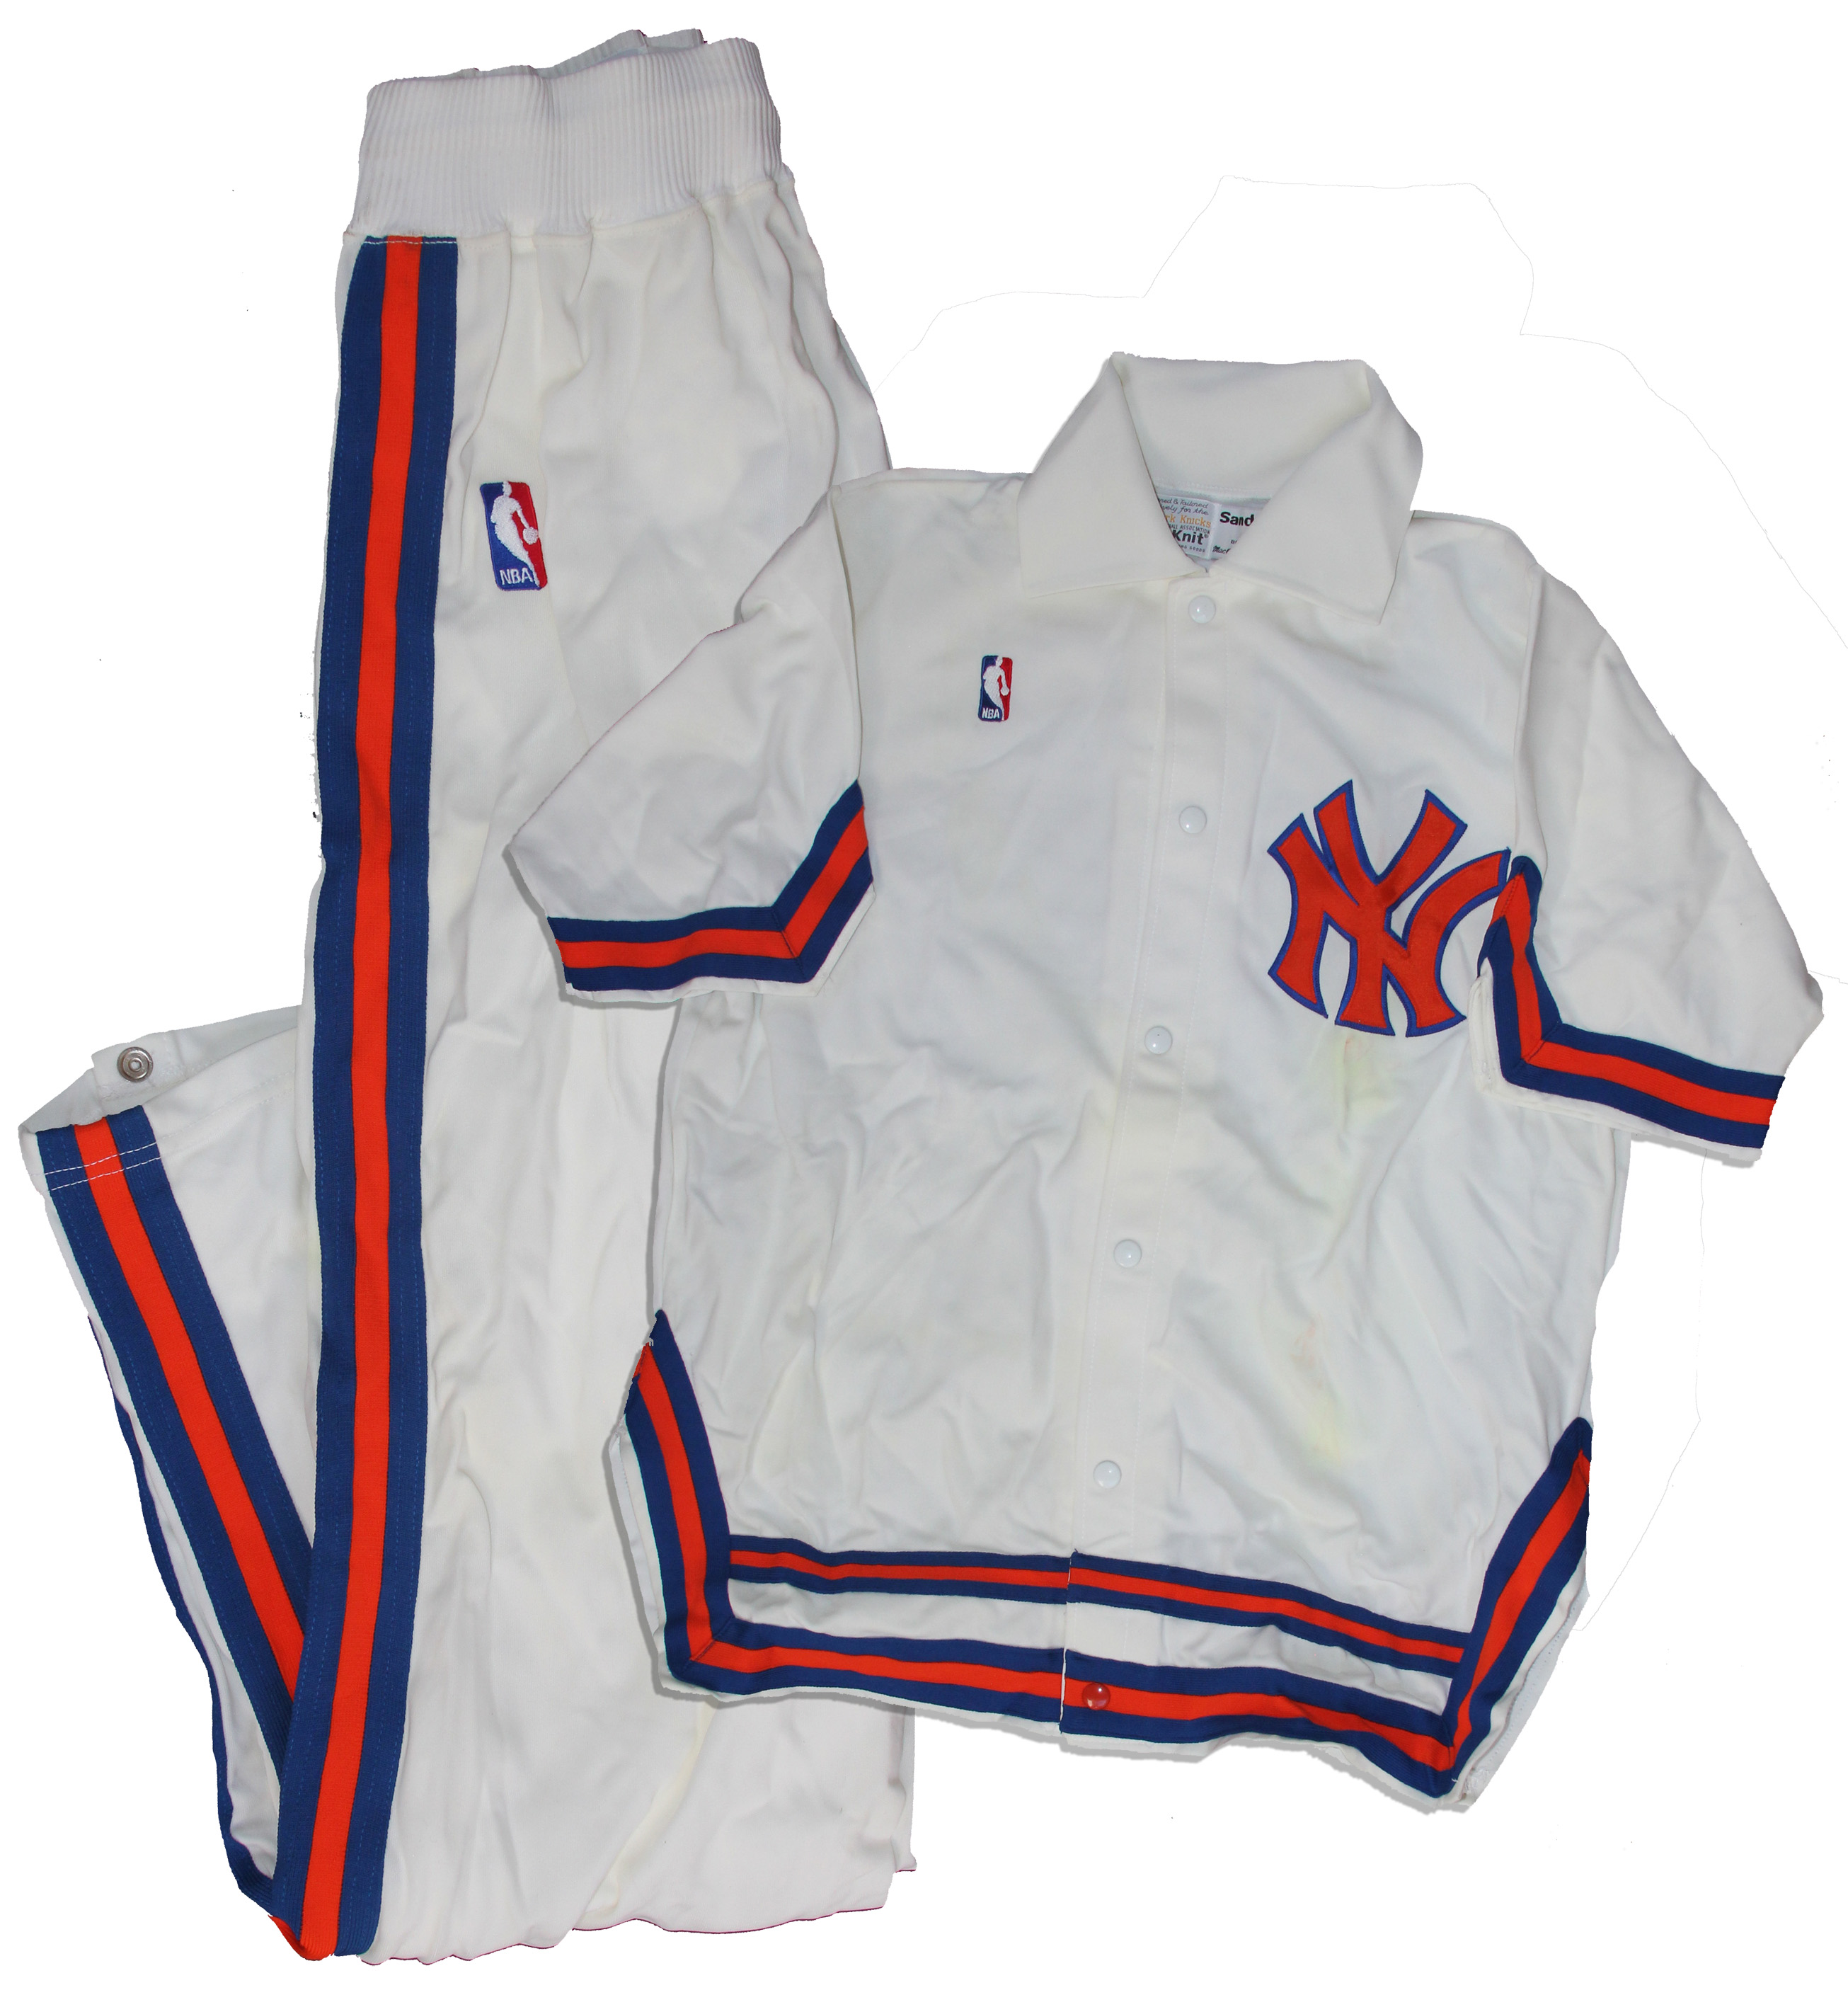 Sell Game Worn New York Knicks Uniform Worn at Nate Sanders Auction